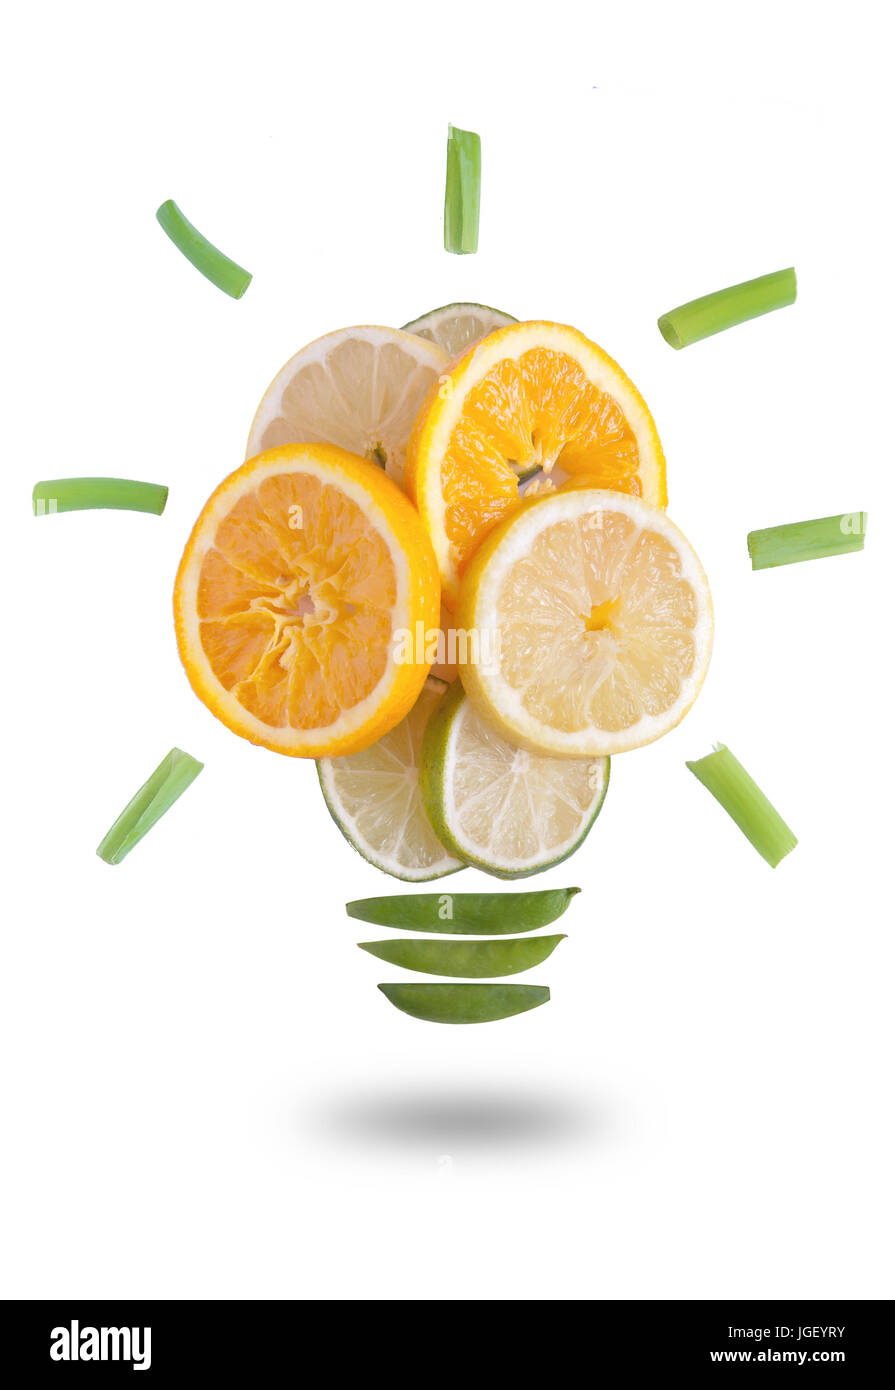 Light bulb made of fruits and vegetables over a white background Stock Photo